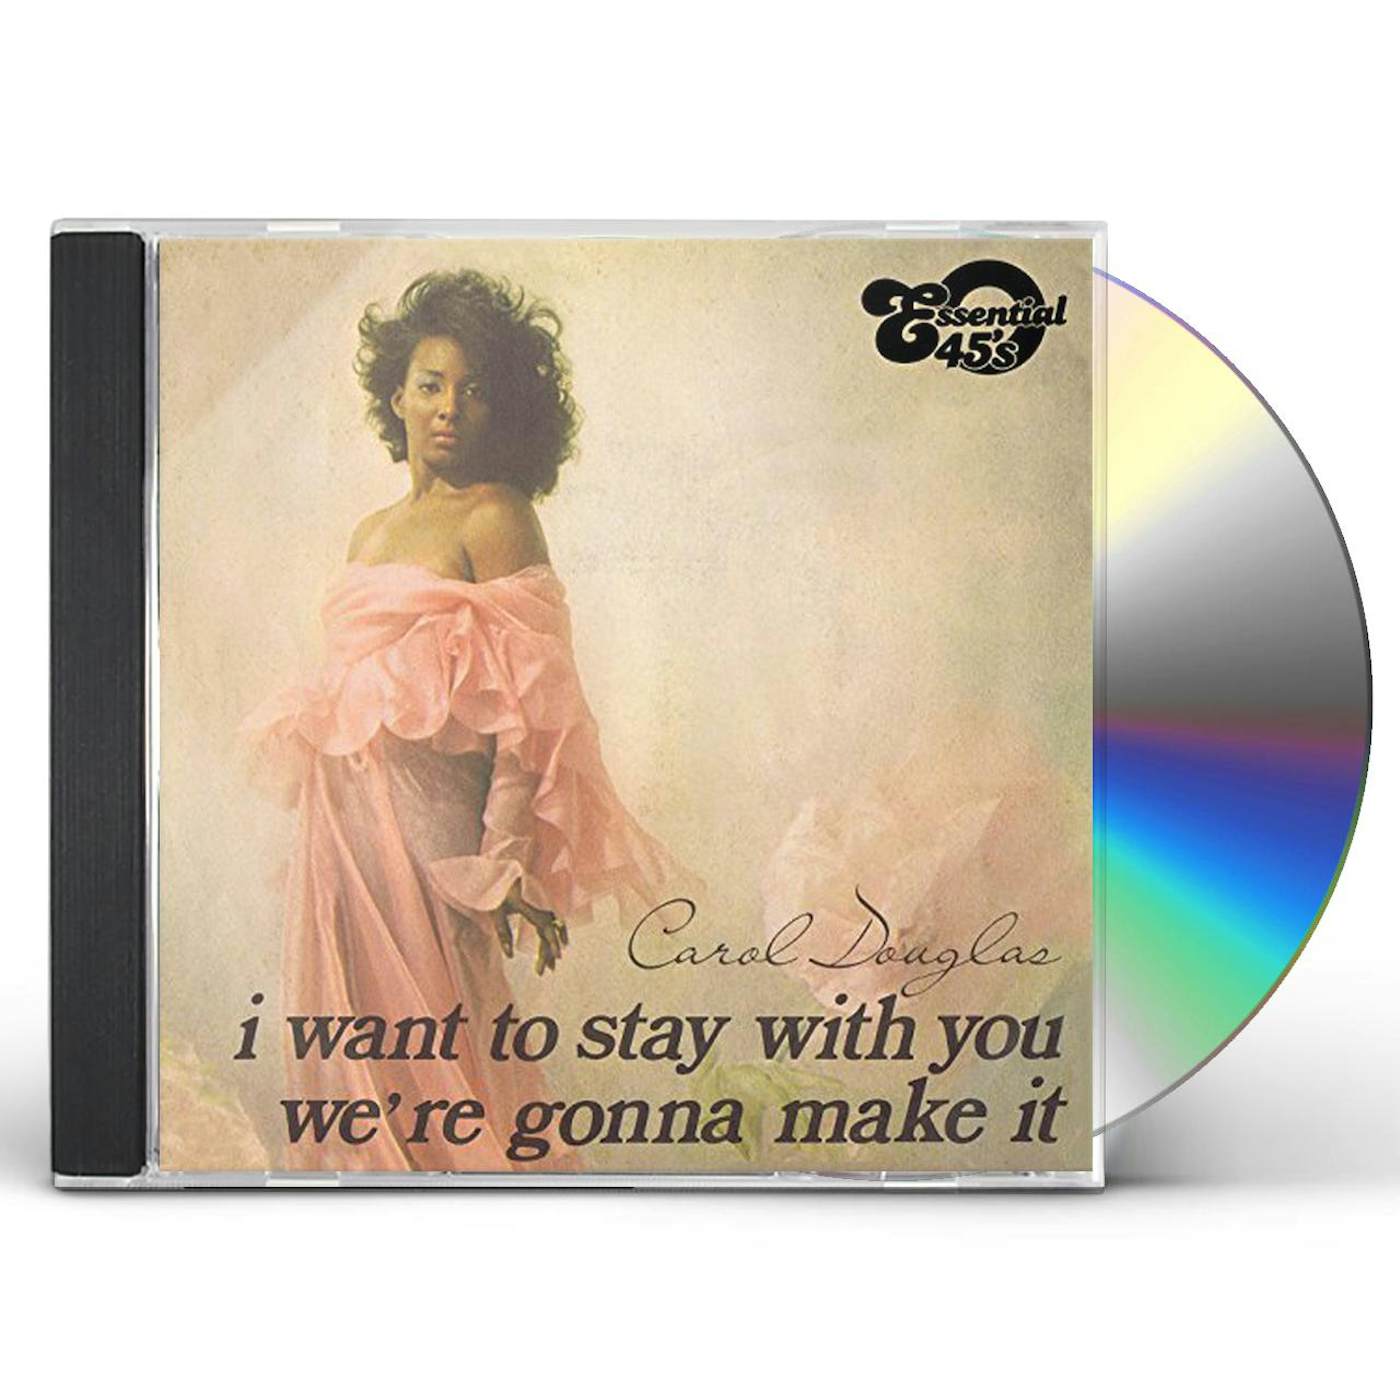 Carol Douglas I WANT TO STAY WITH YOU / WE'RE GONNA MAKE IT CD